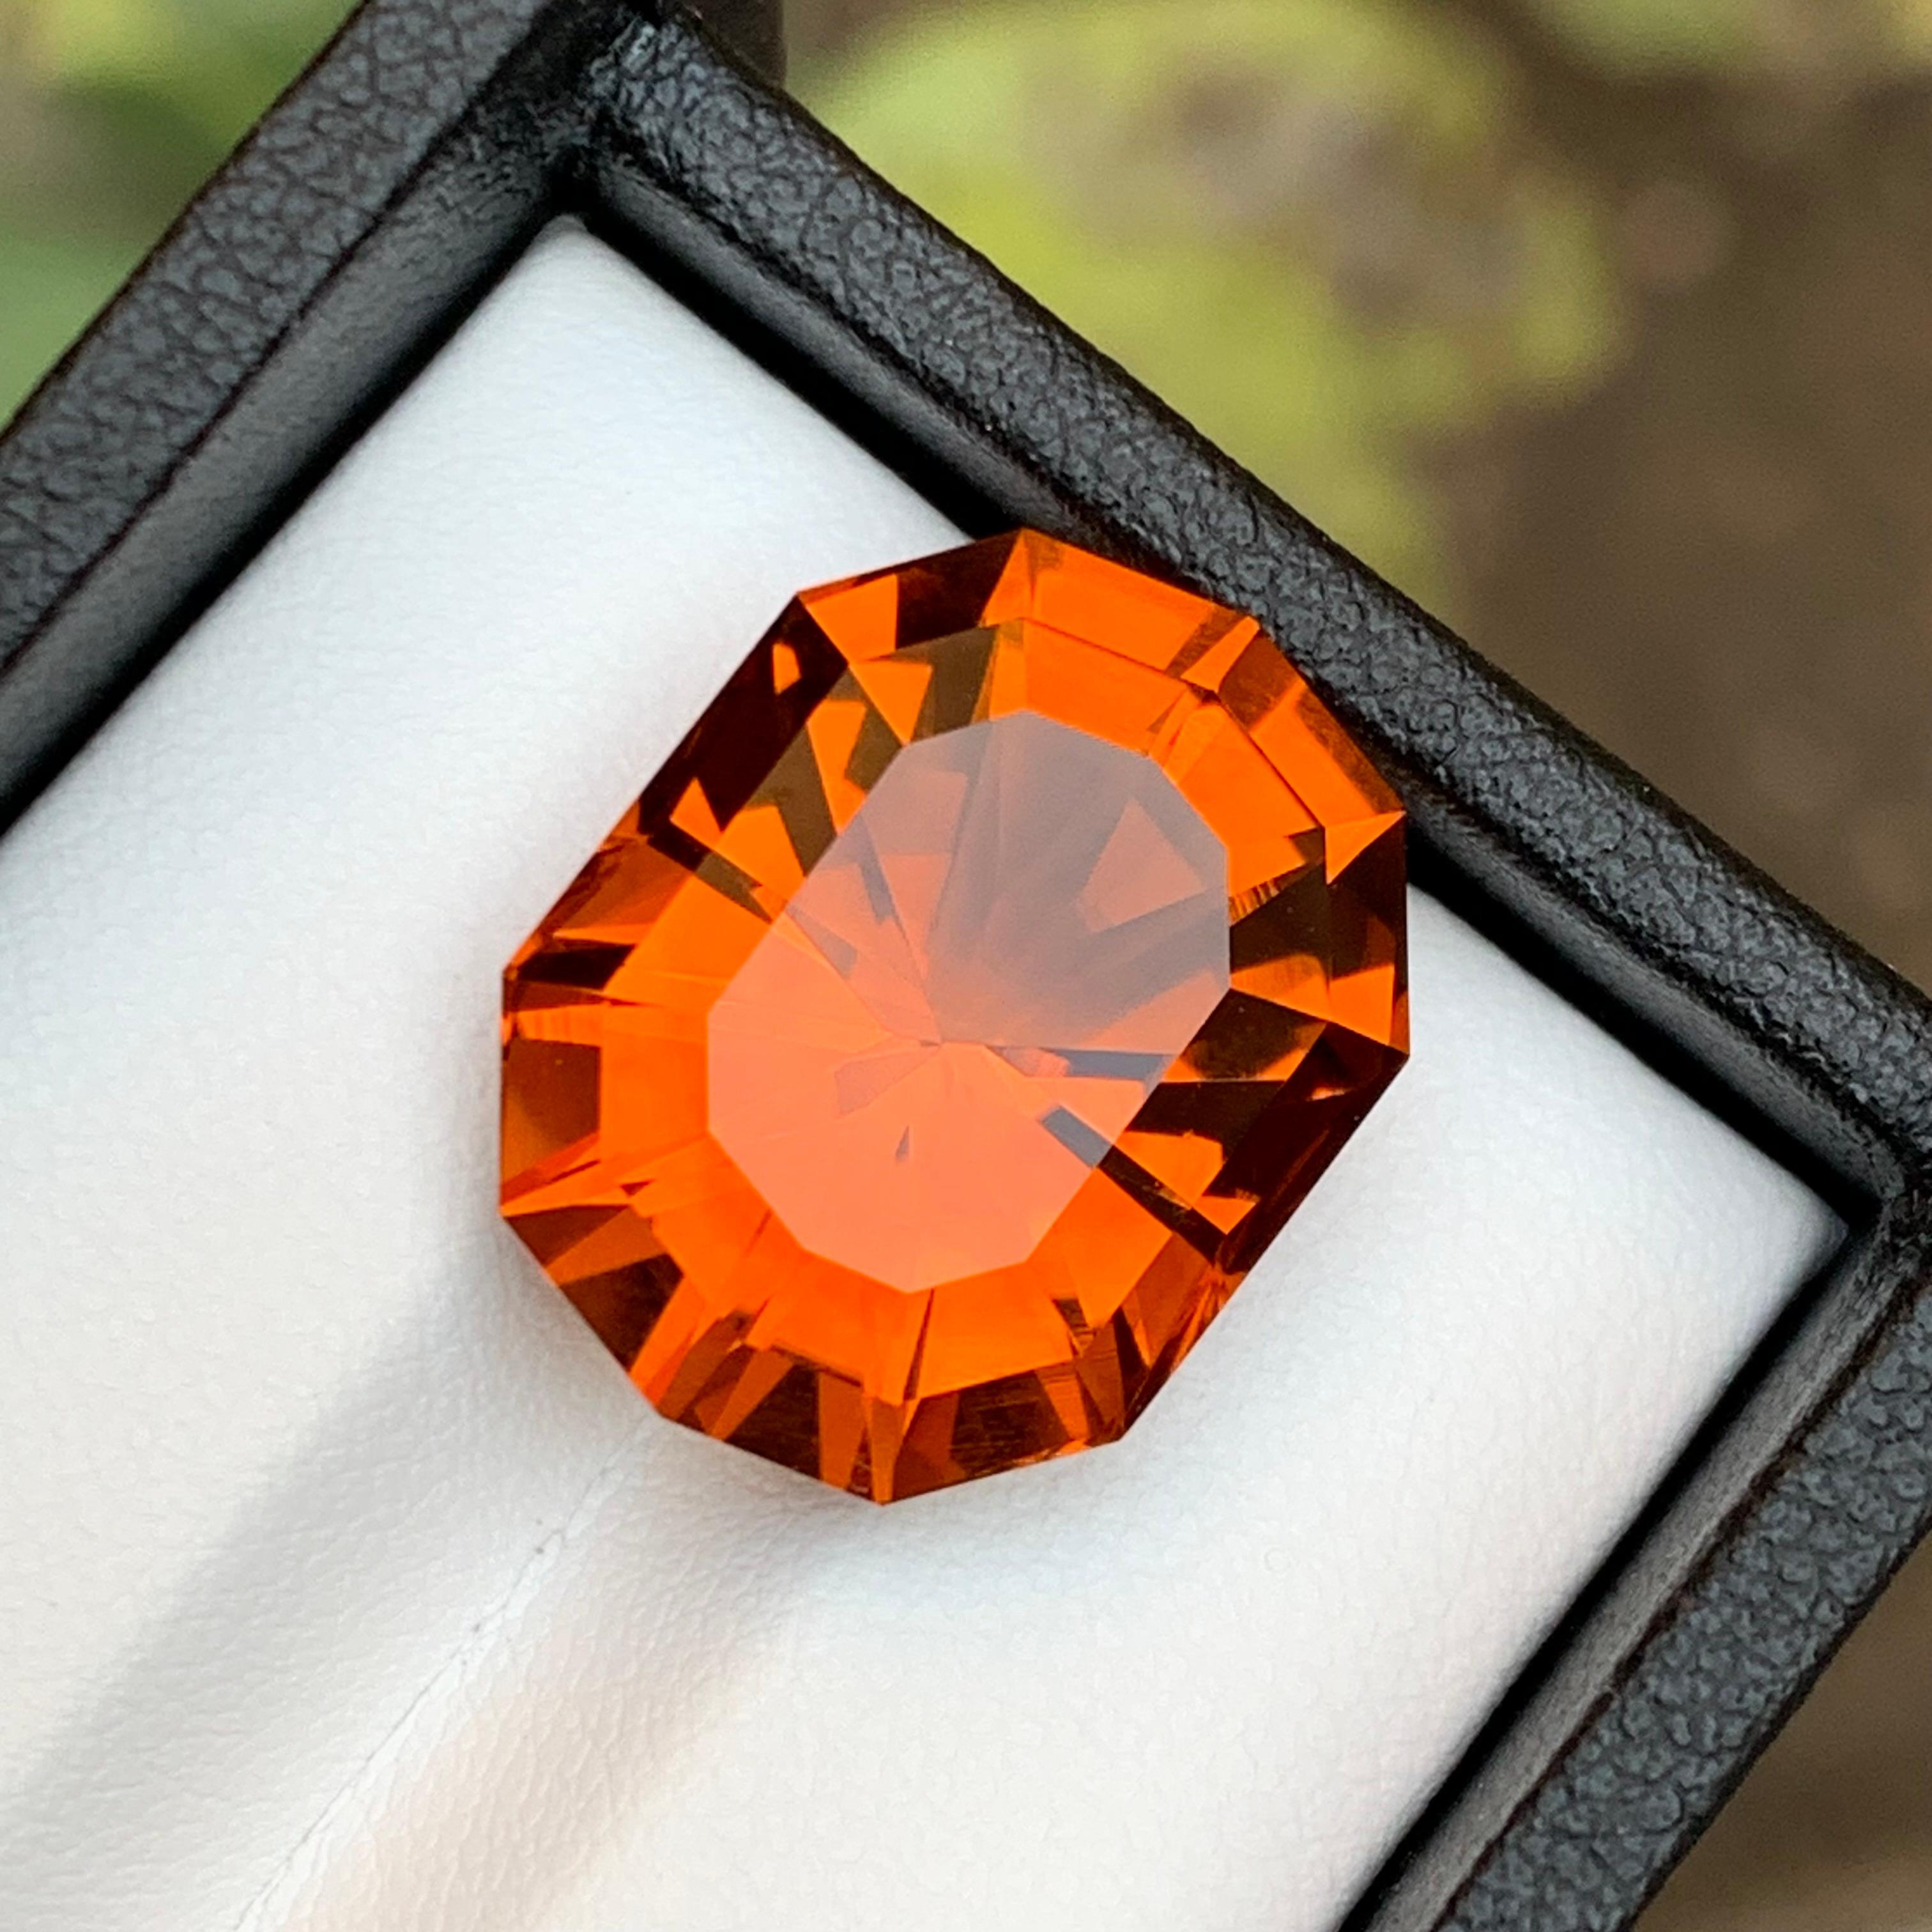 GEMSTONE TYPE: Madeira Citrine
PIECE(S): 1
WEIGHT: 15.30 Carats
SHAPE: Fancy
SIZE (MM):  19.00 x 14.74 x 10.72
COLOR: Deep Fanta Orange
CLARITY: Loupe Clean
TREATMENT: None
ORIGIN: Brazil
CERTIFICATE: On demand

Feast your eyes on a radiant gemstone